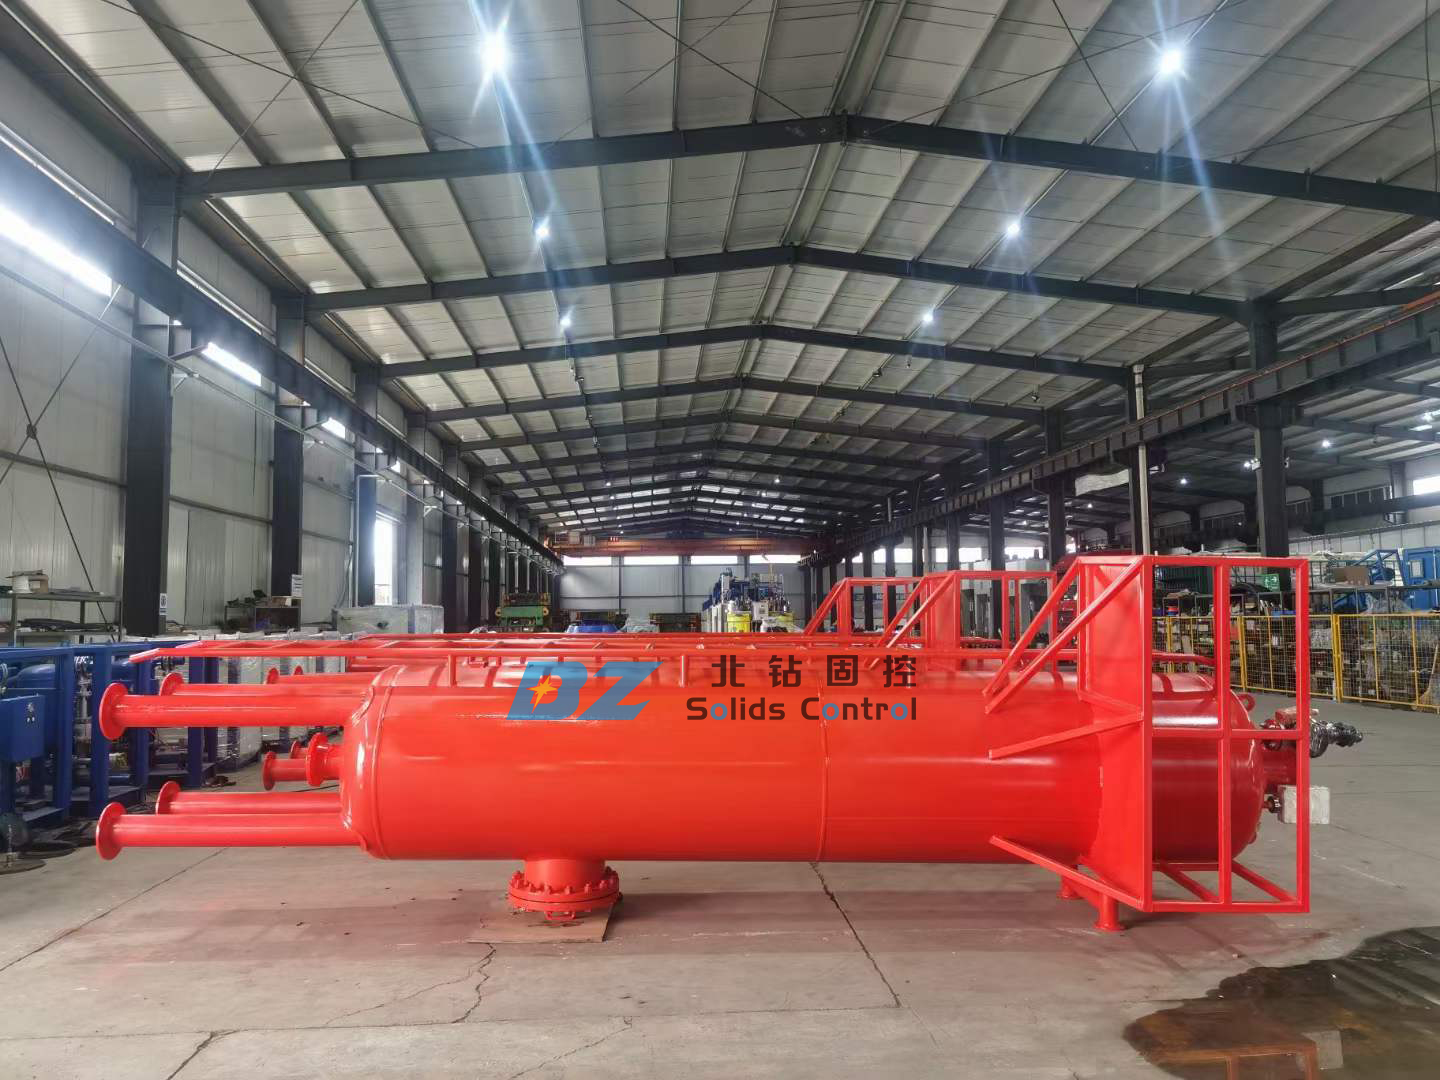 BZ mud gas separator were sent to offshore drilling site